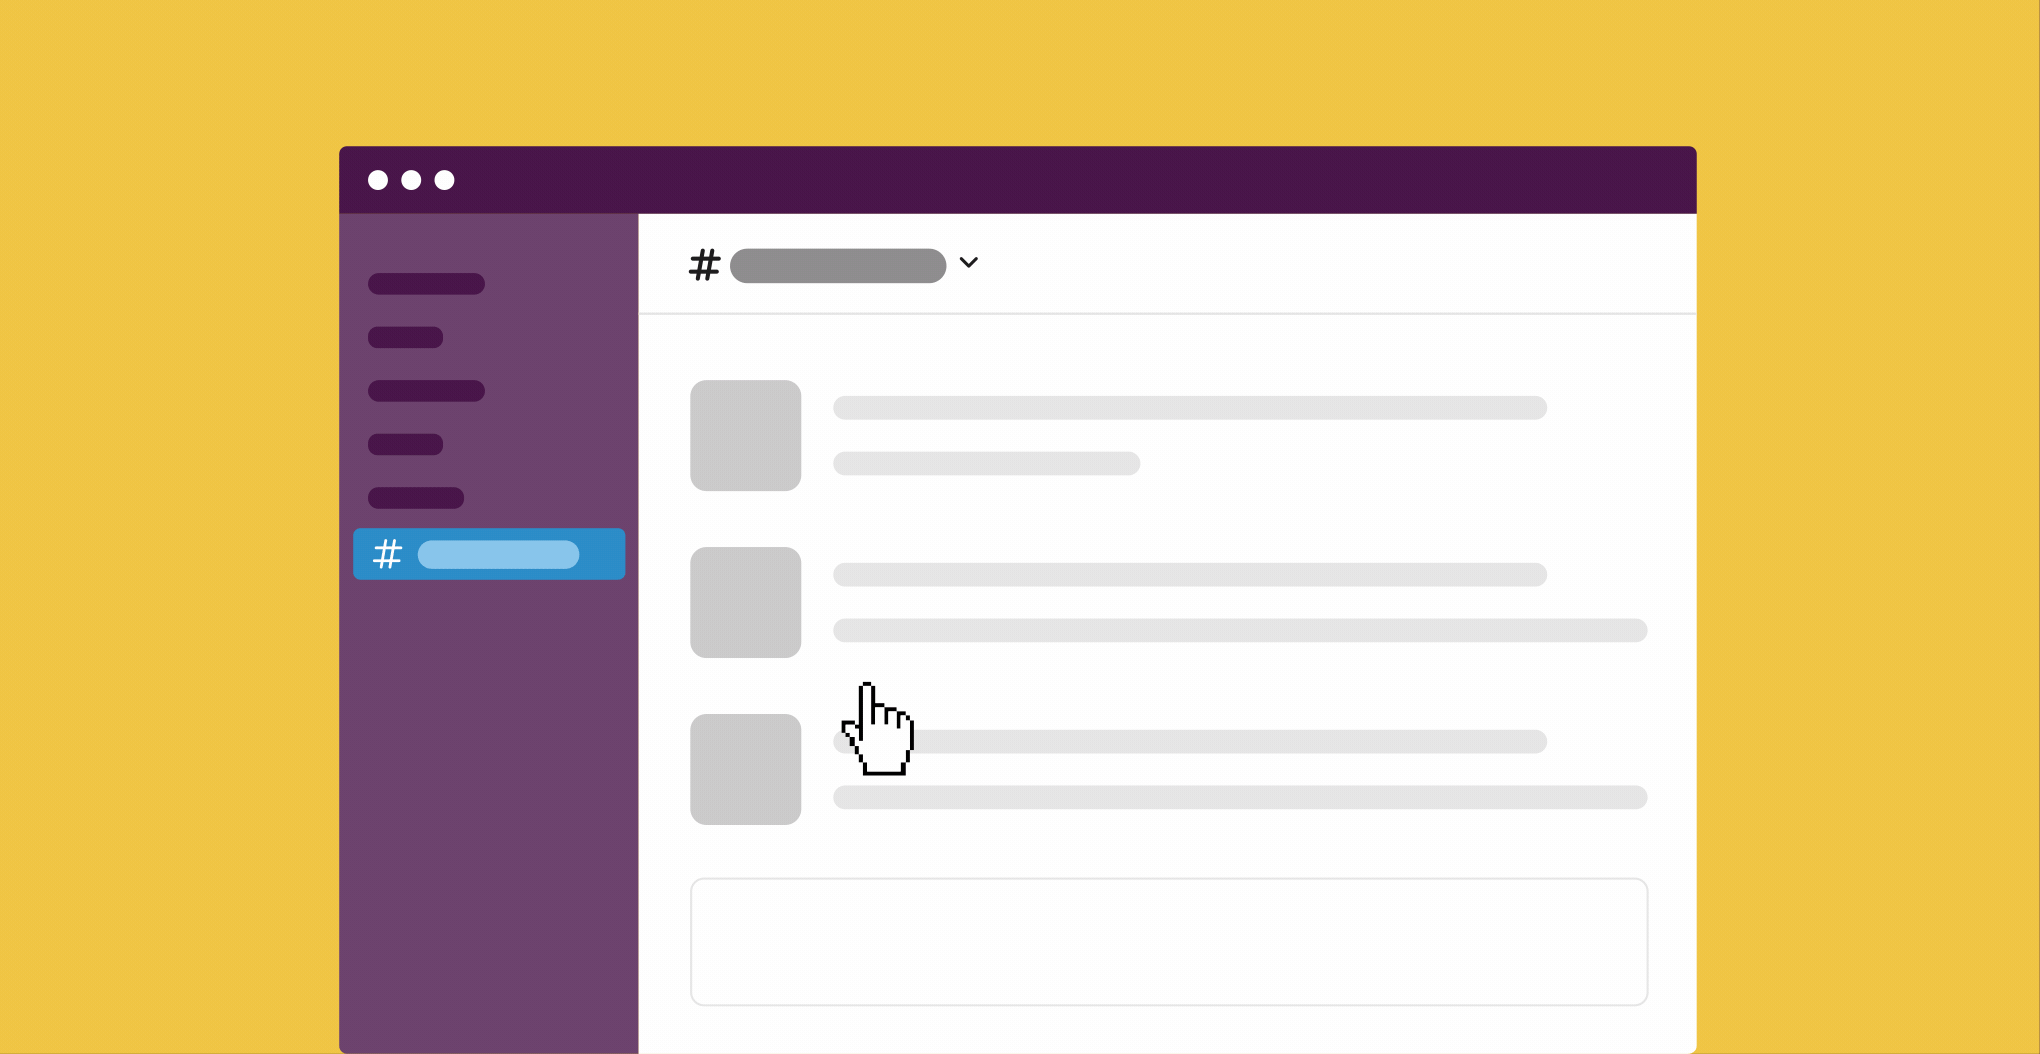 Opening a channel in a new window from the sidebar in the Slack desktop app